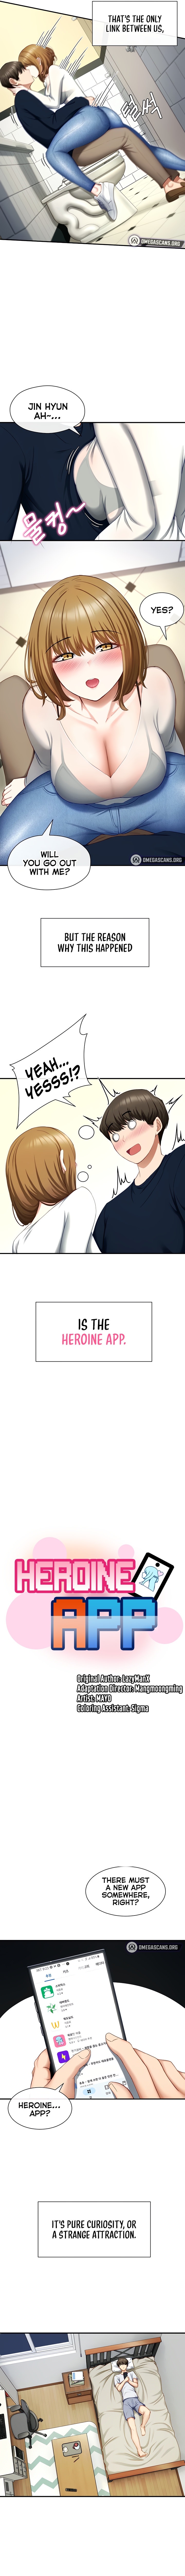 Heroine App - Chapter 1 Page 5